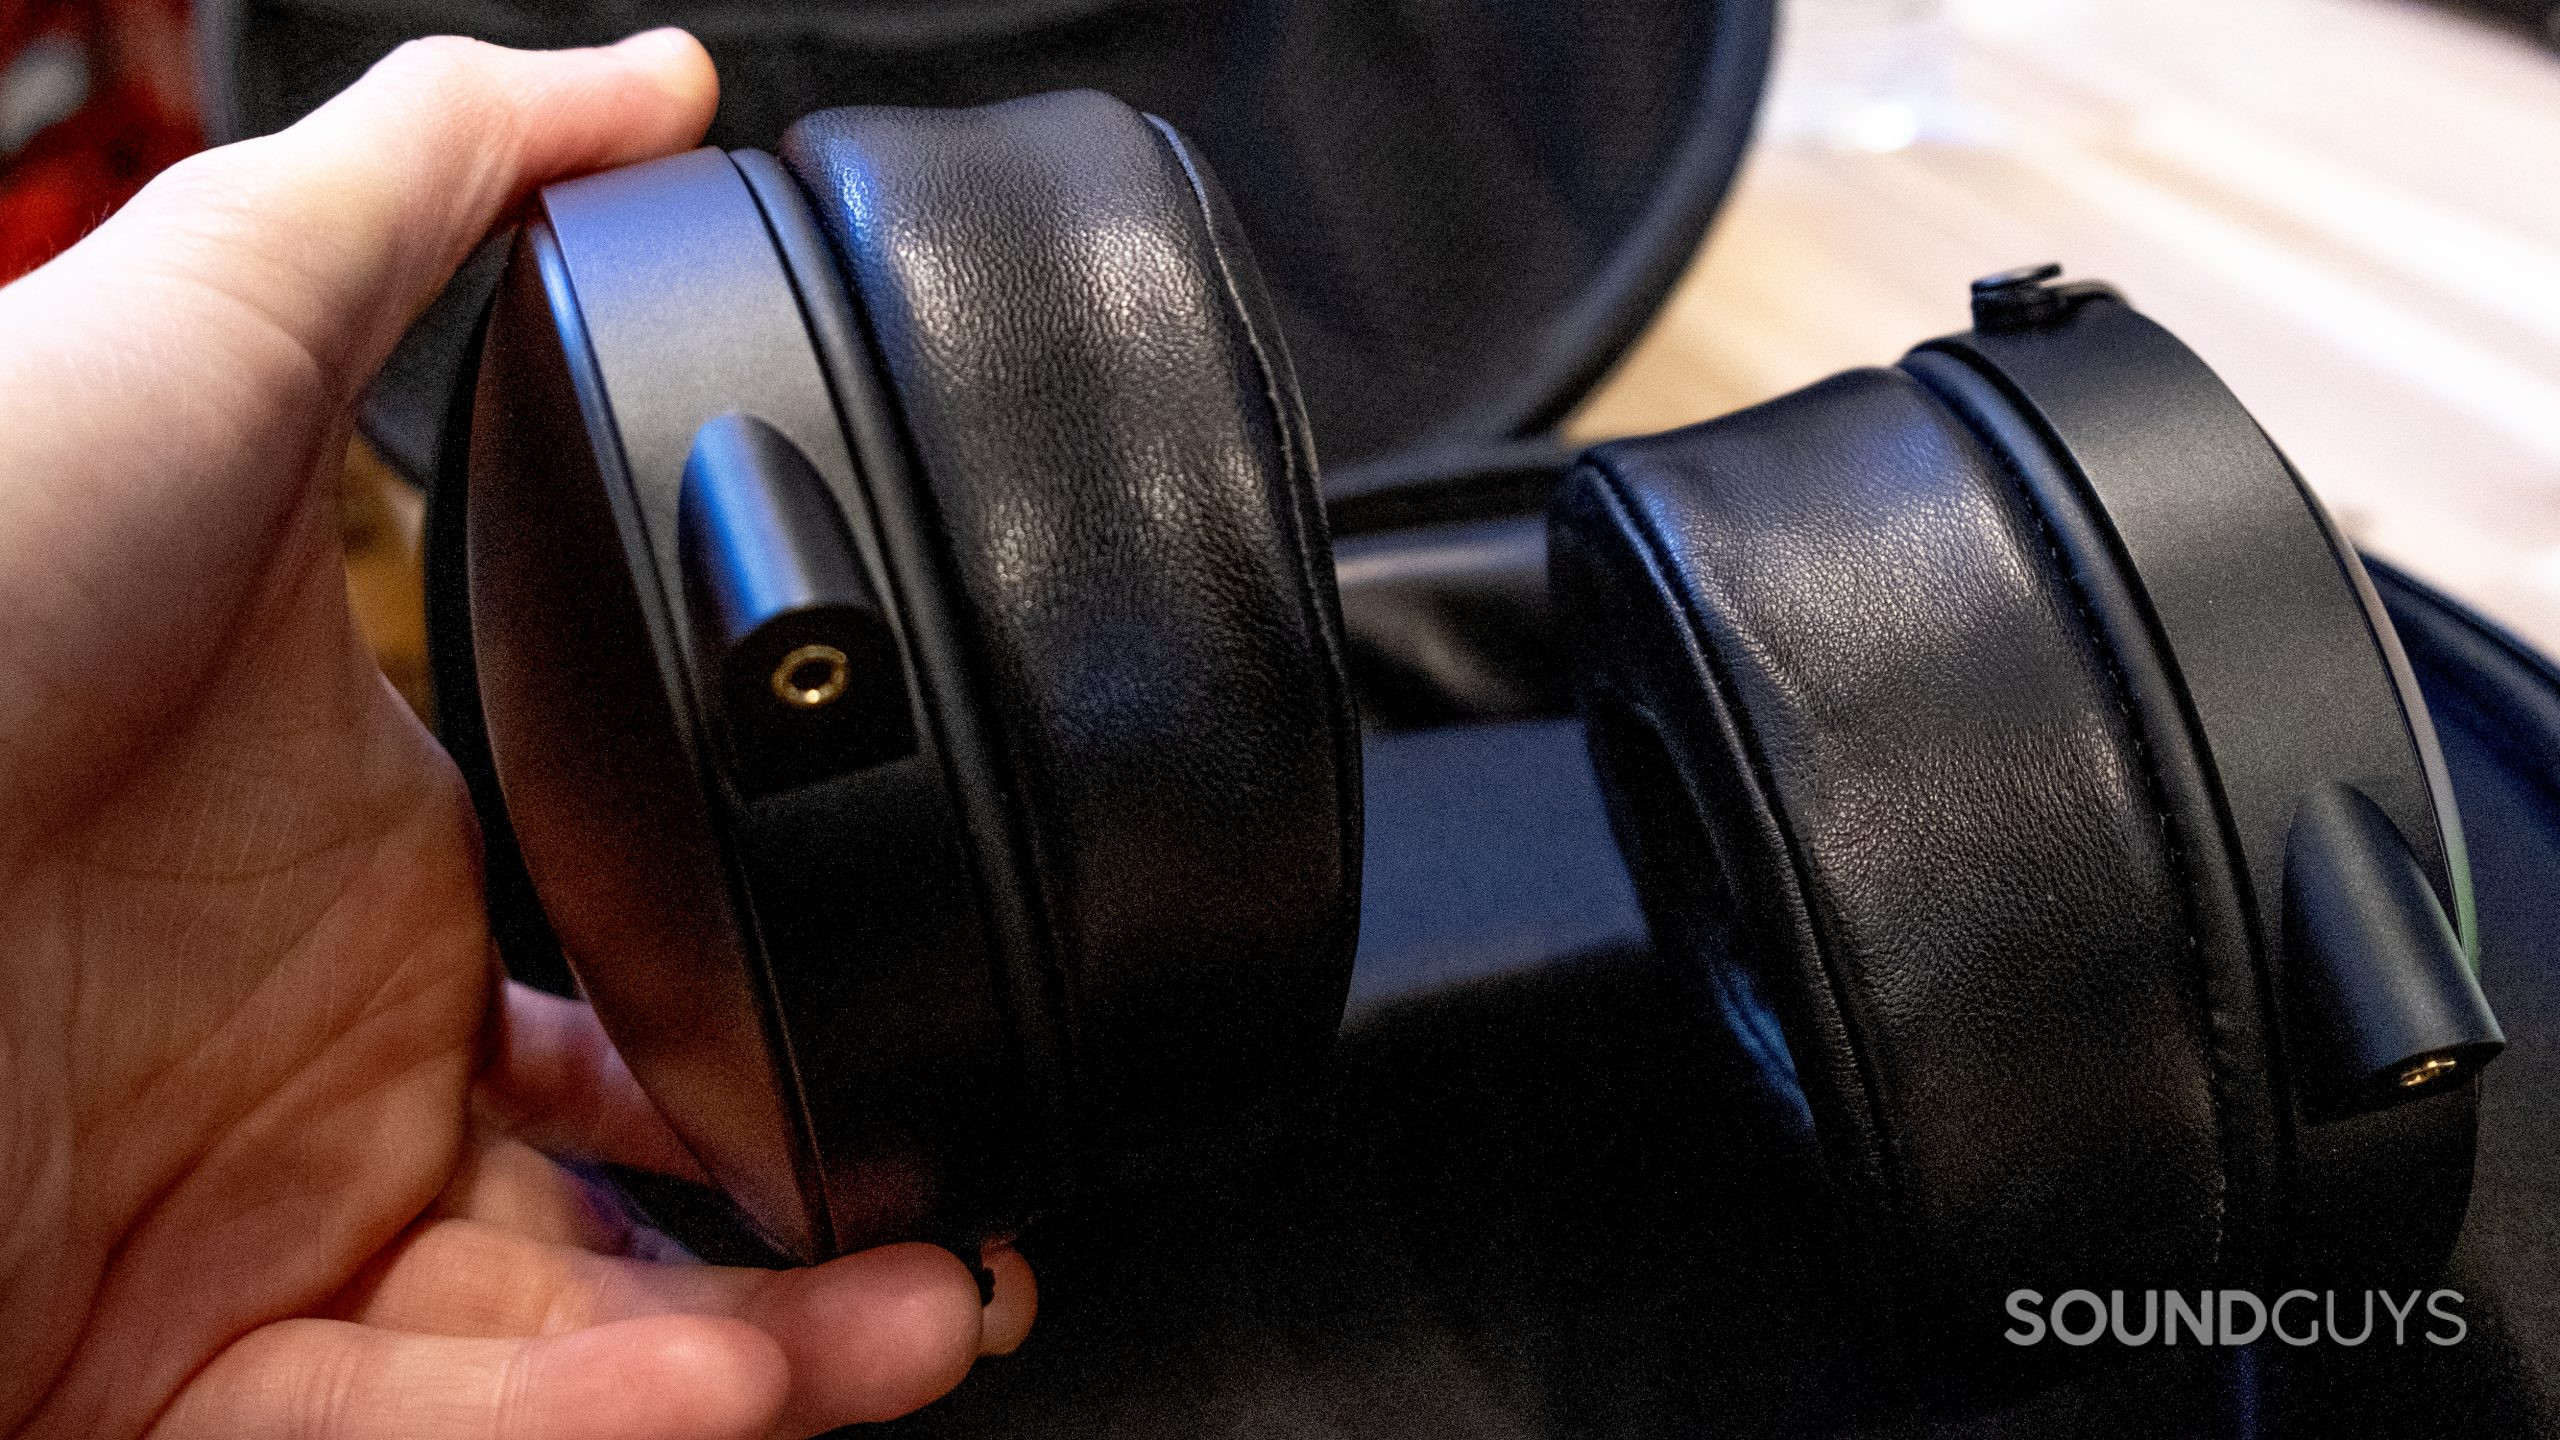 A hand holds up the bottom of the ear cup of the Monolith by Monoprice M1070C in its case.